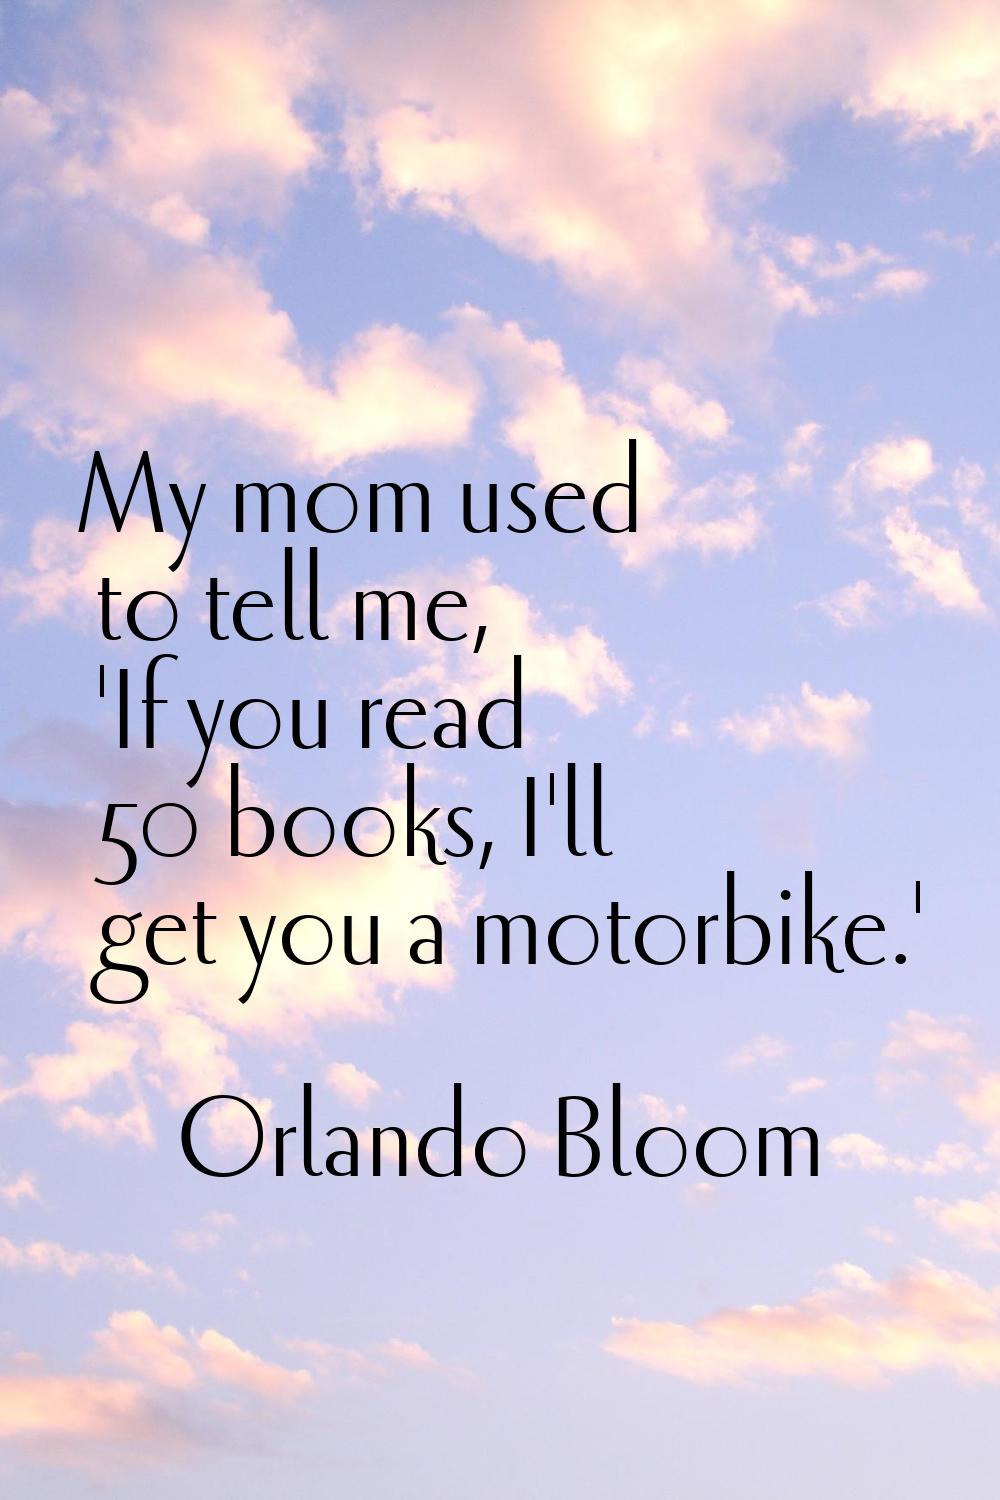 My mom used to tell me, 'If you read 50 books, I'll get you a motorbike.'